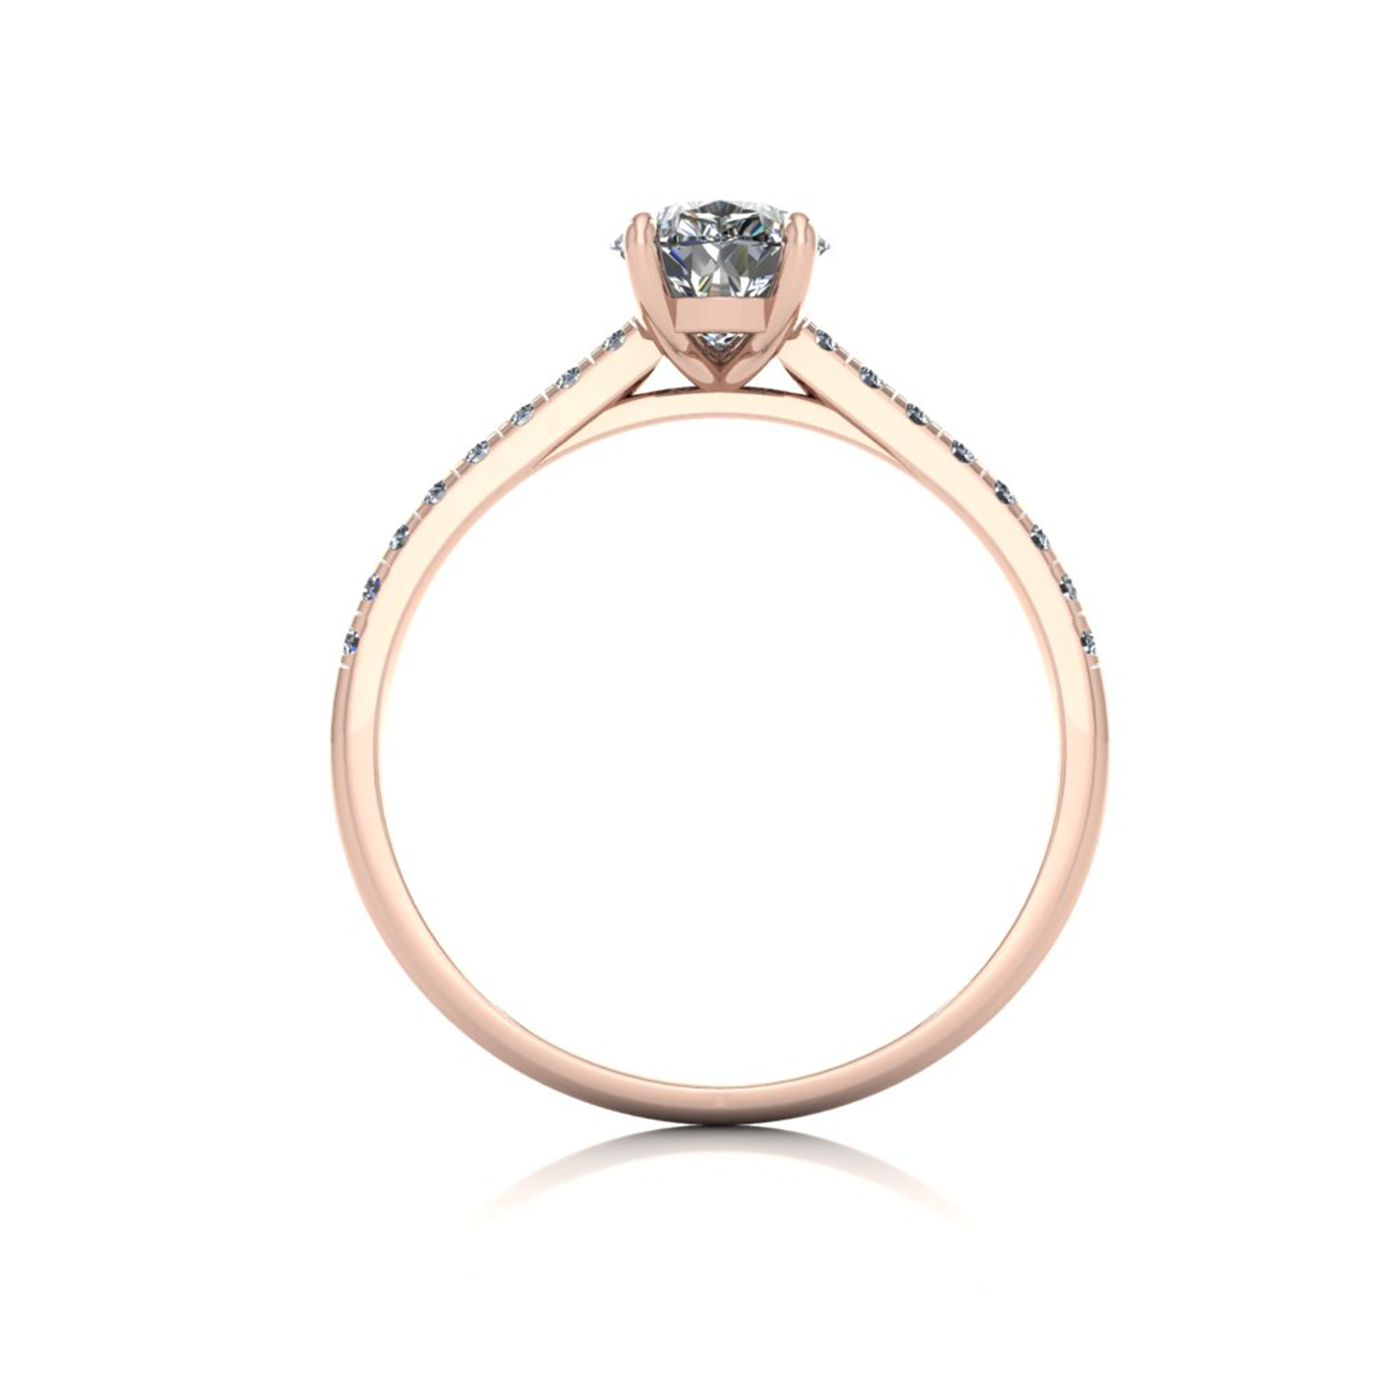 18k rose gold 1.2ct 3 prongs pear diamond engagement ring with whisper thin pavÉ set band